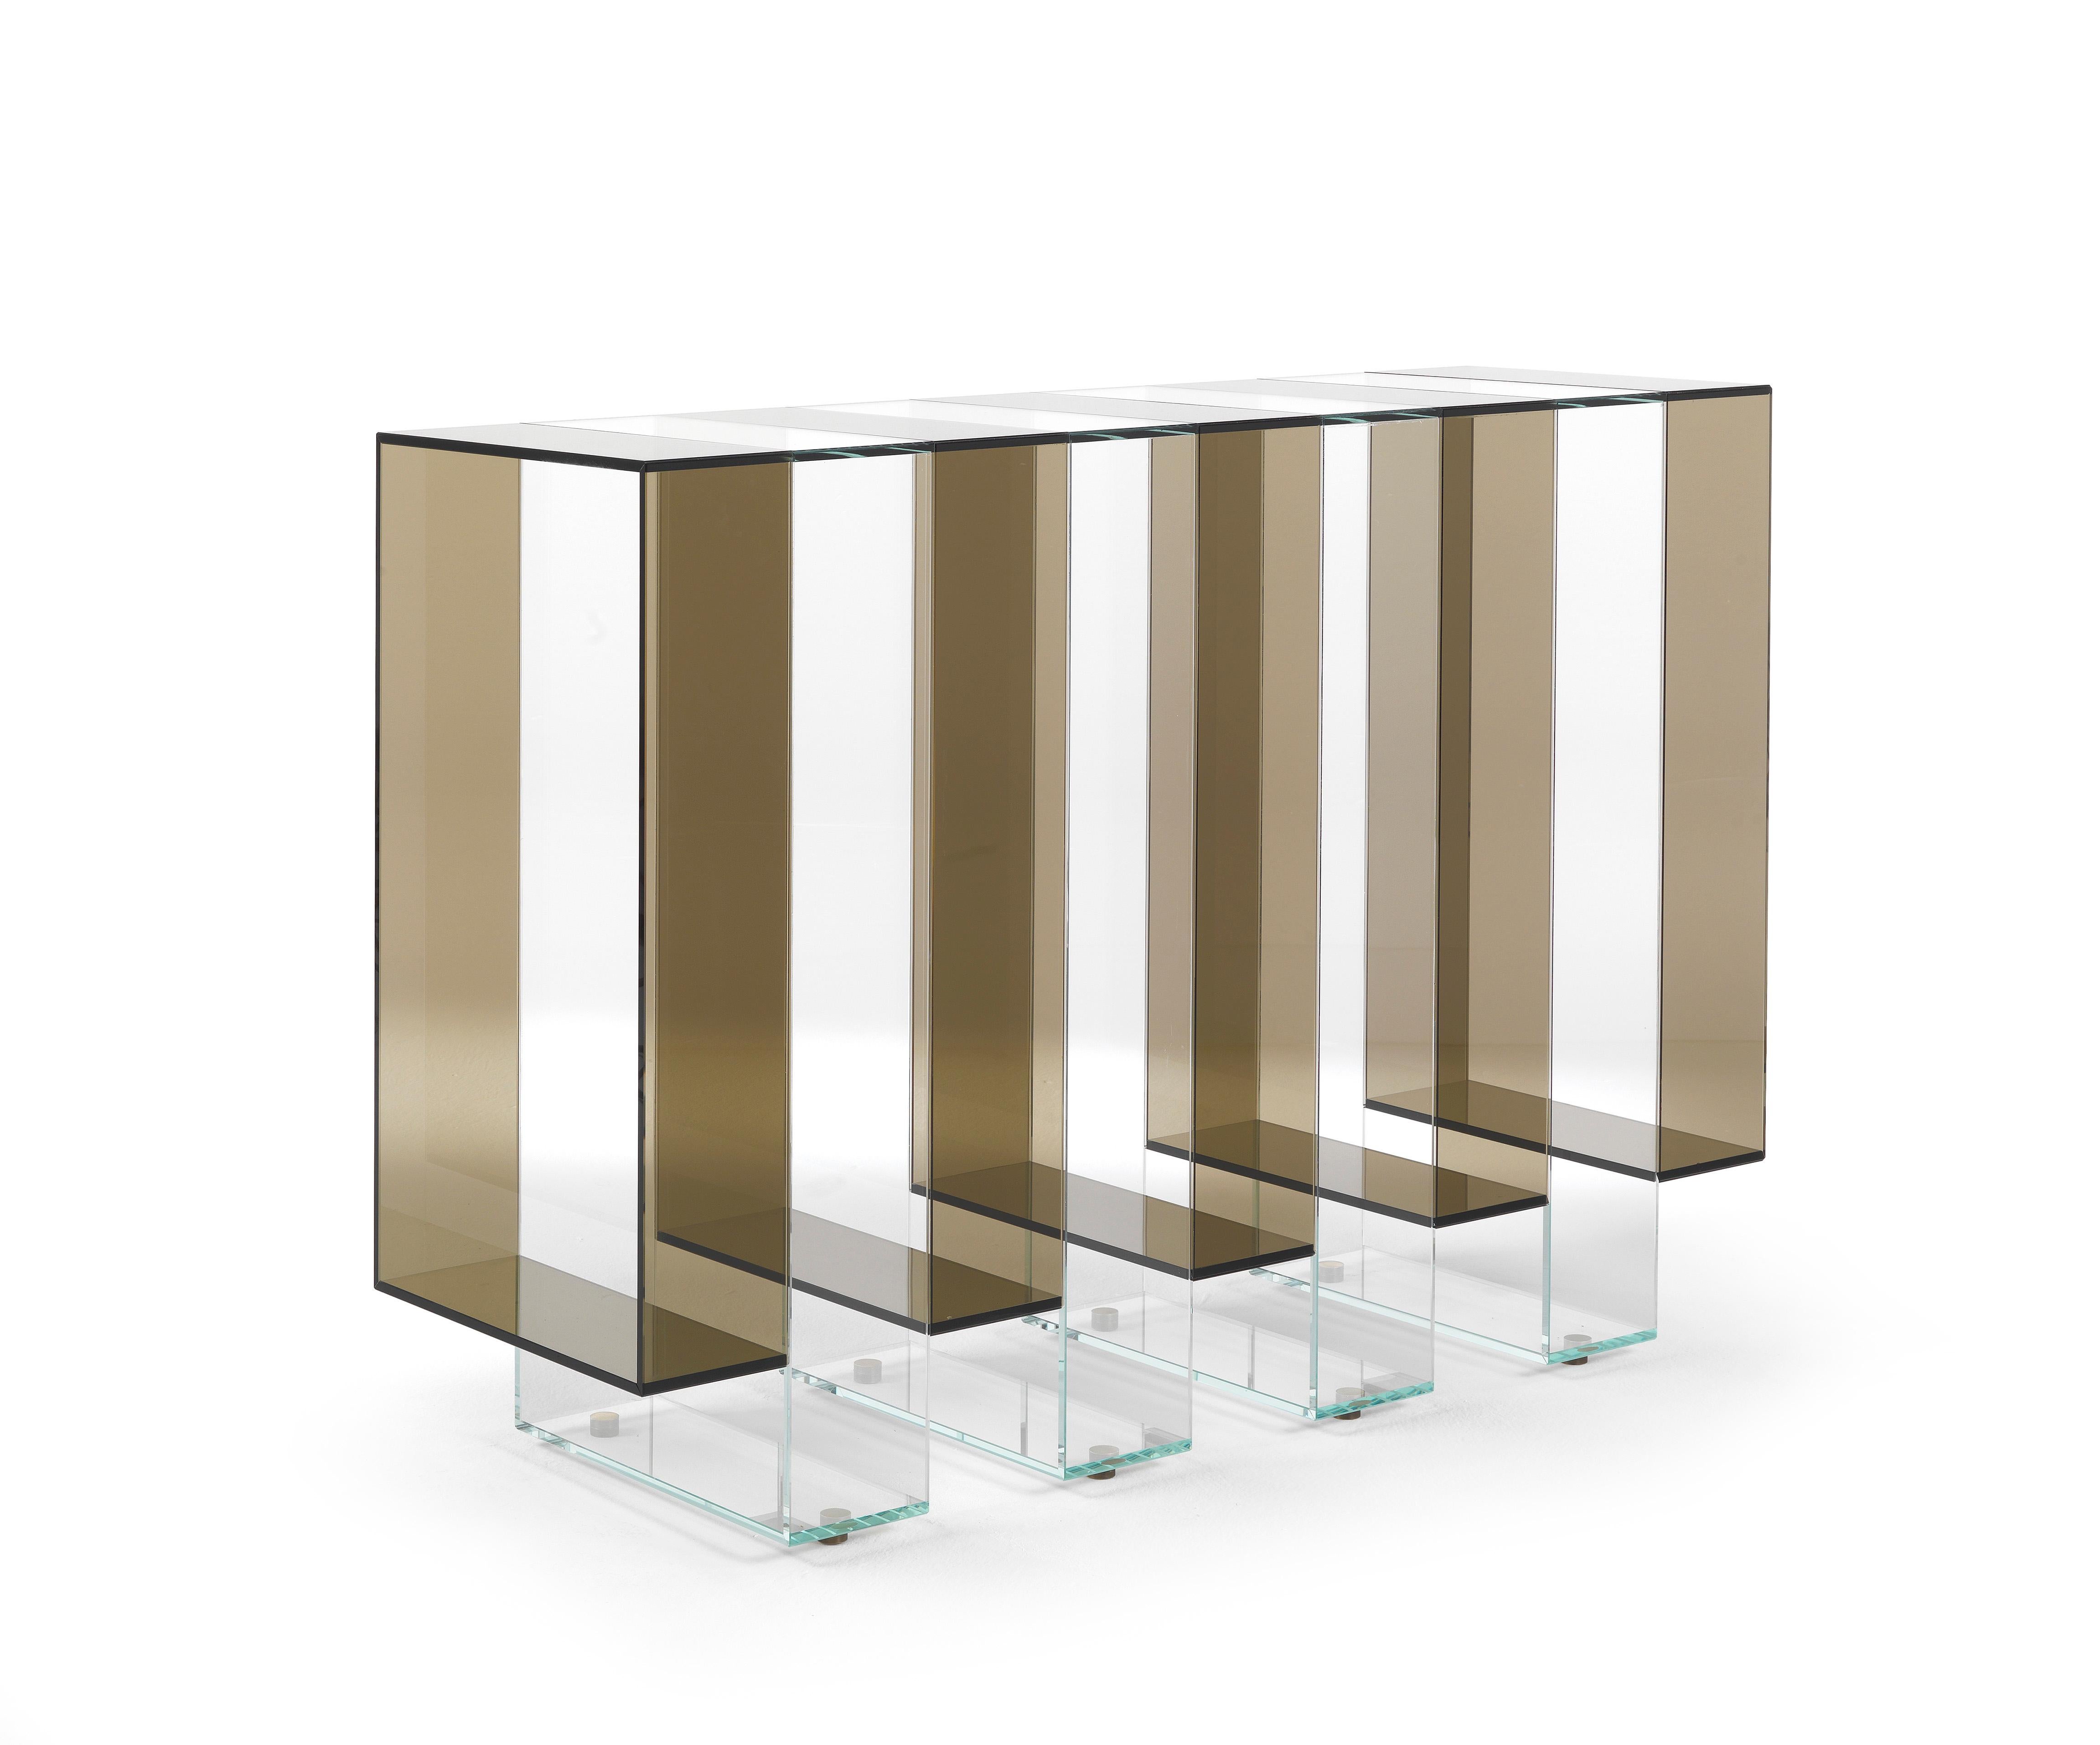 Pure volumes and essential lines: these are the main features of the Jenga console. A composition with a refined design that is expressed in the succession of light and dark glass rectangles, assembled at 45° and joined without showing grafts or